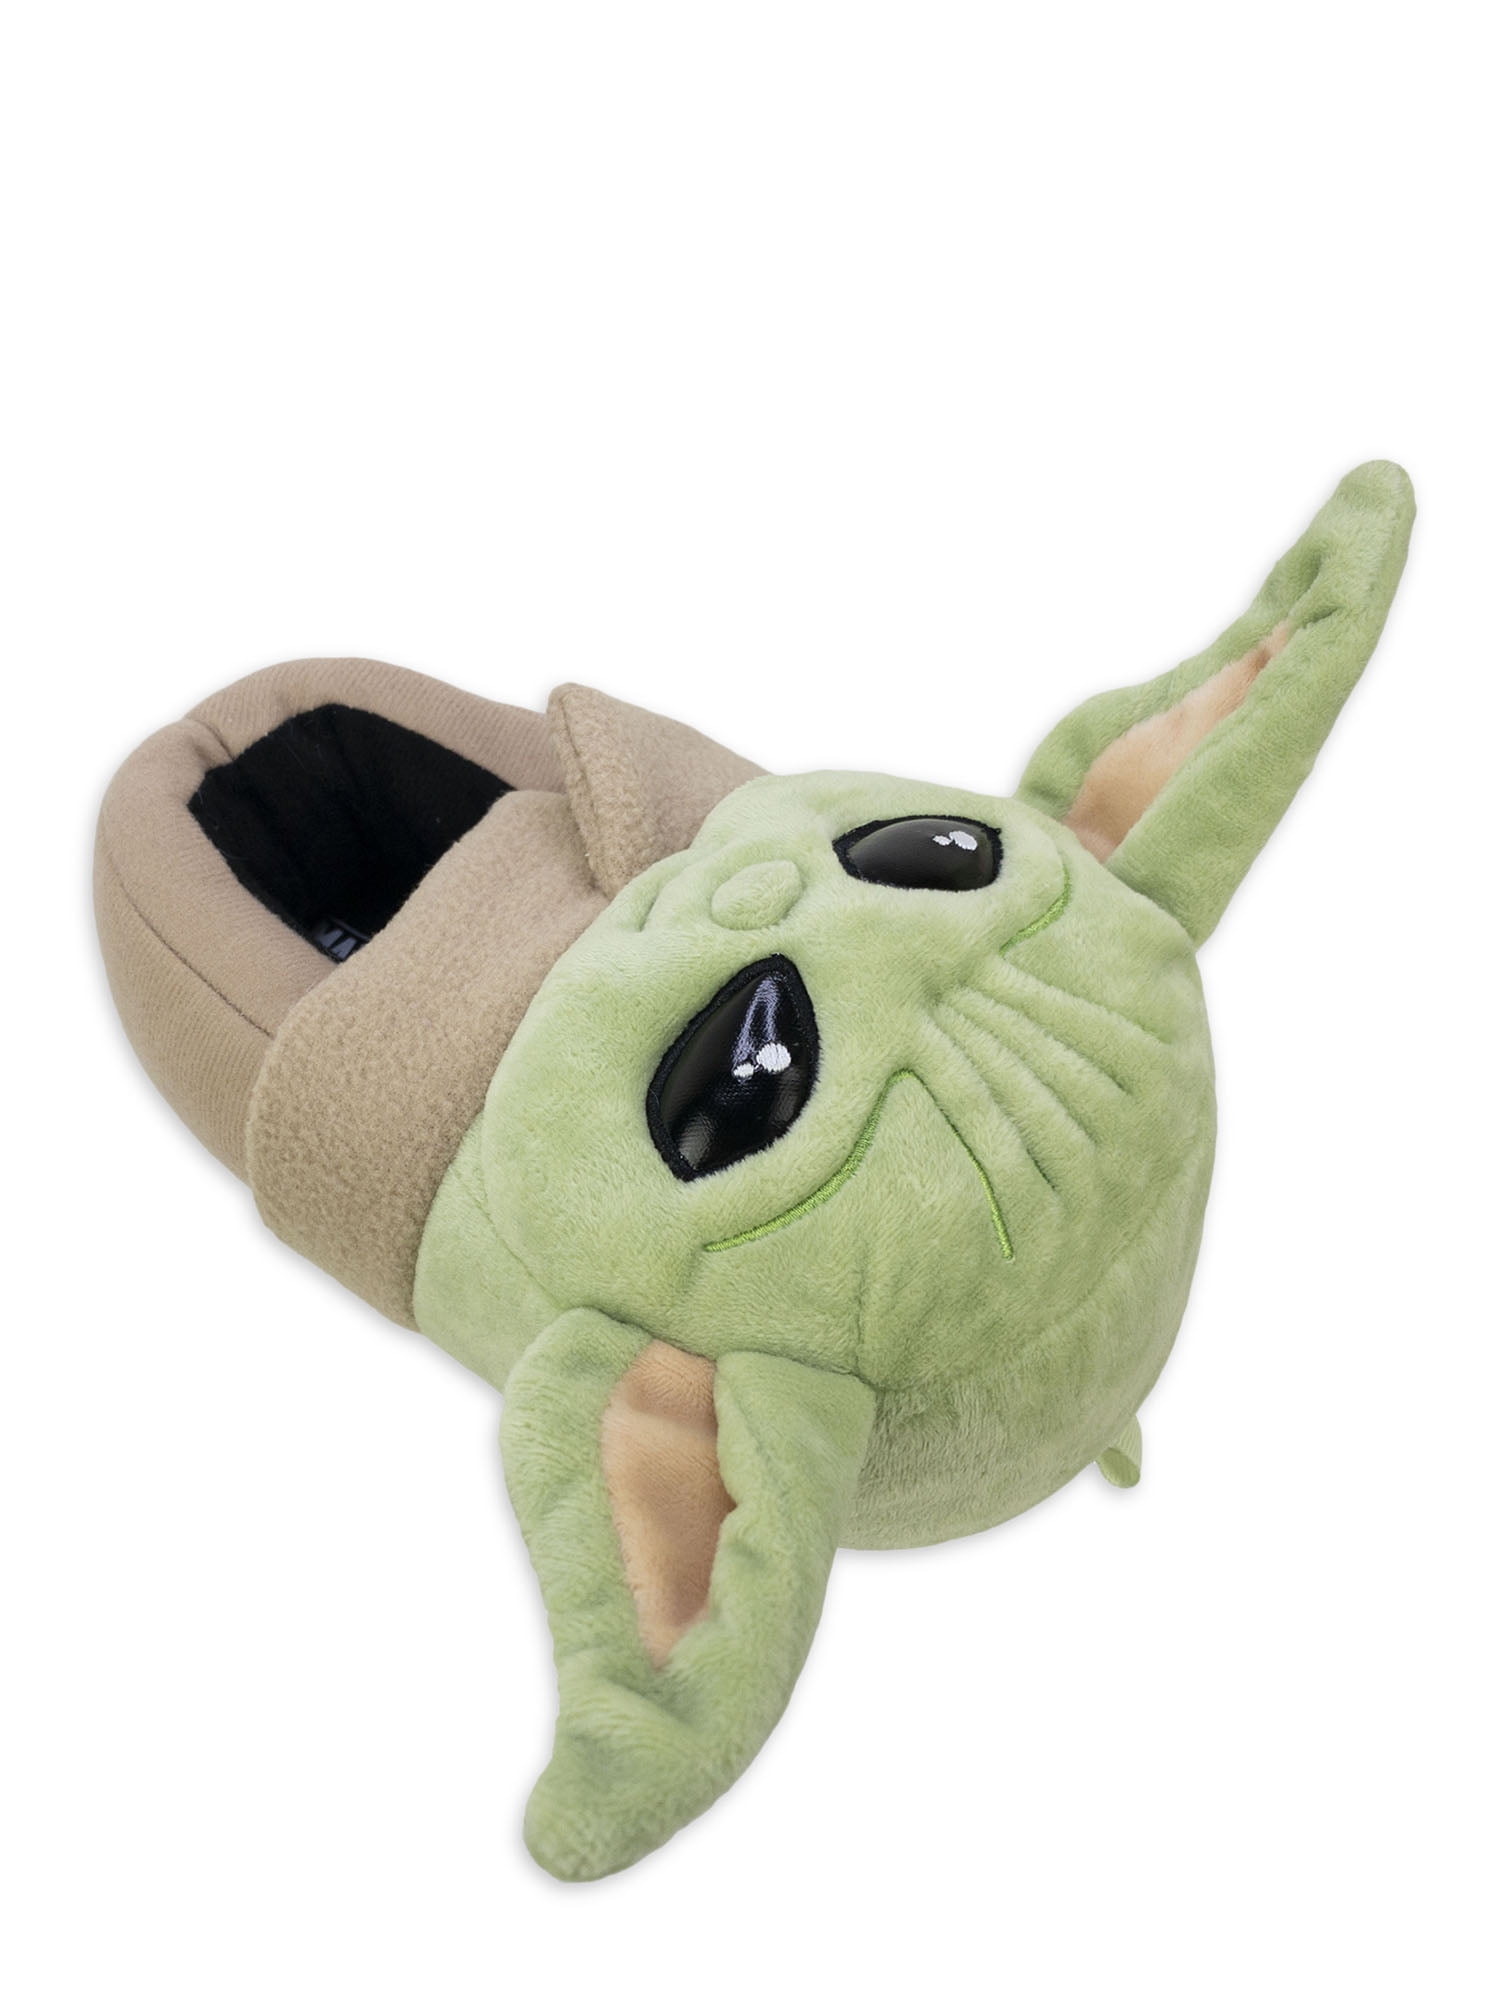 Star Wars Plush Fuzzy Yoda Character Slippers Toddler Youth Boys Sizes NEW CUTE 